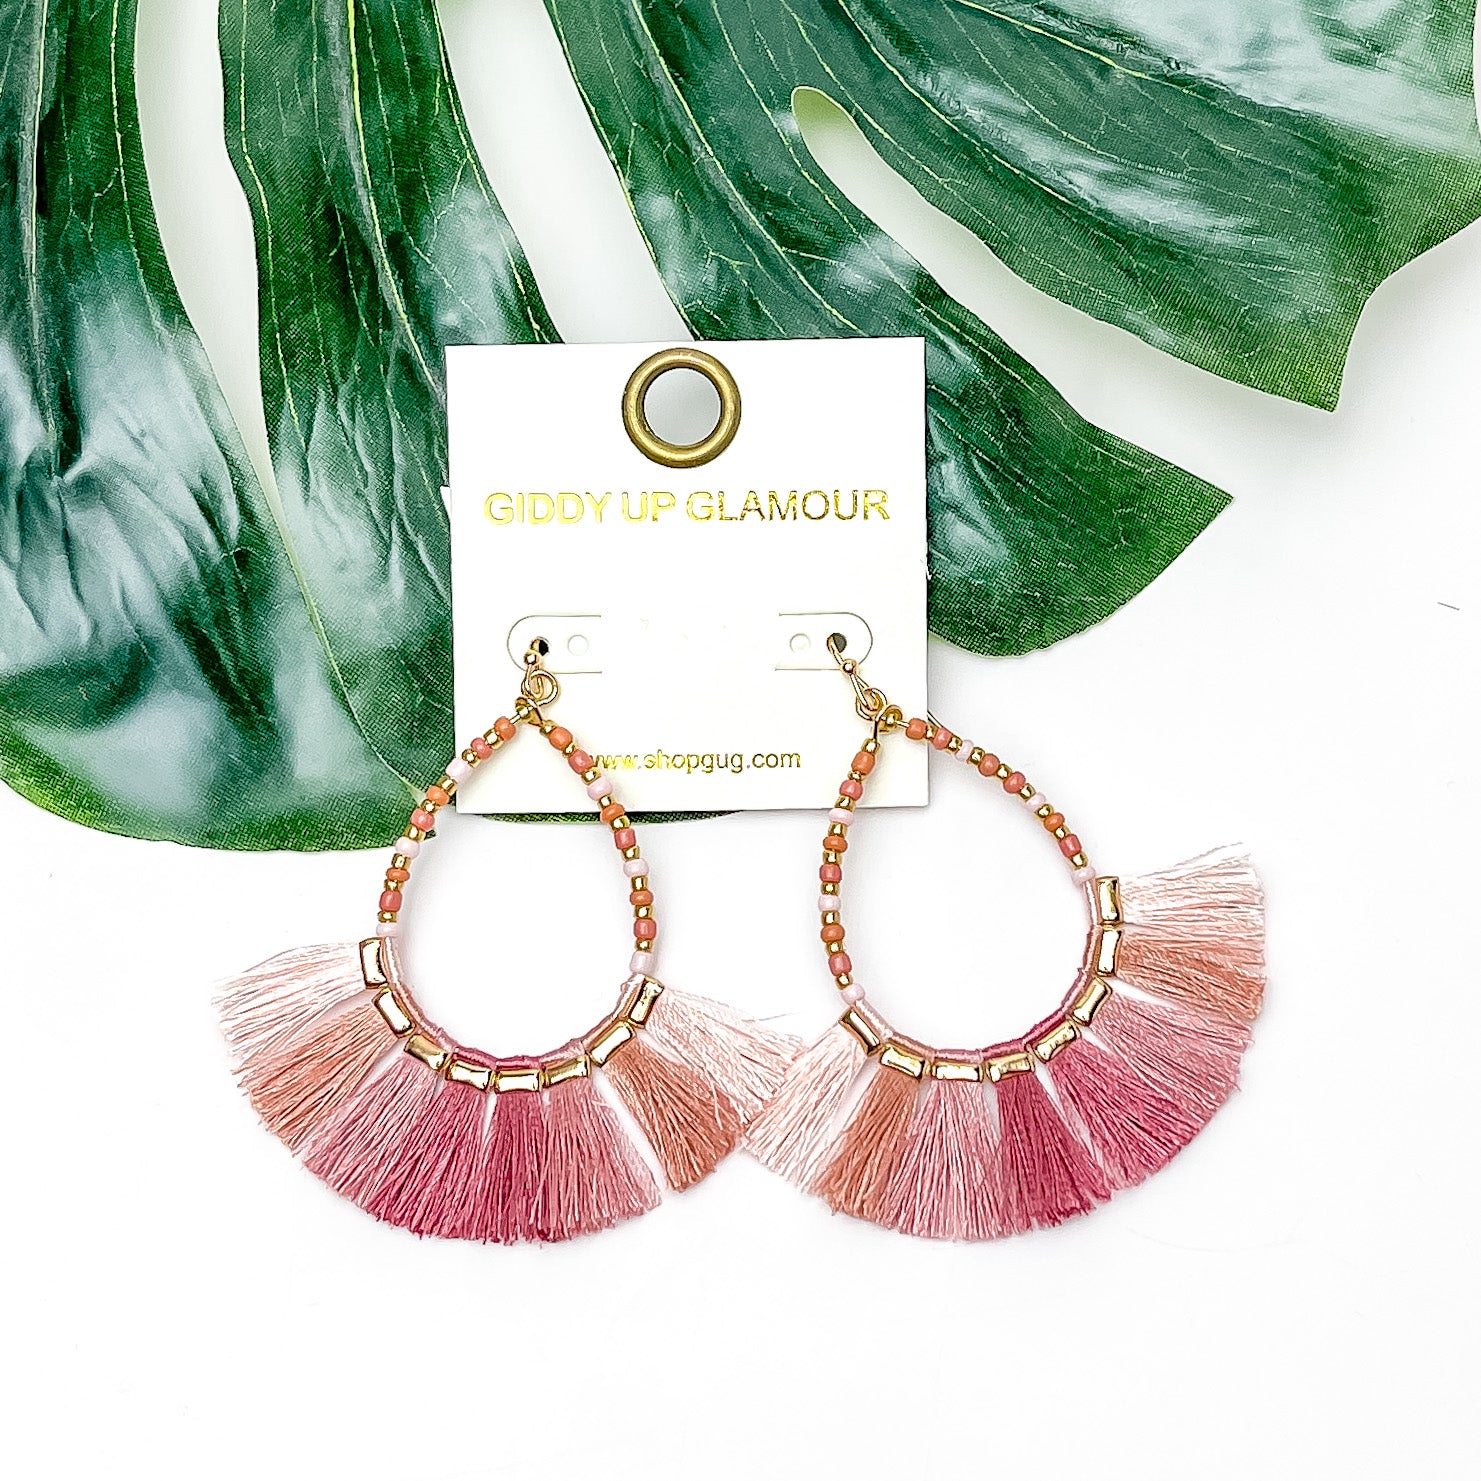 Beaded Open Teardrop Earrings With Fringe Bottom in Pink Tones. Pictured ono a white background with a leaf behind the earrings.